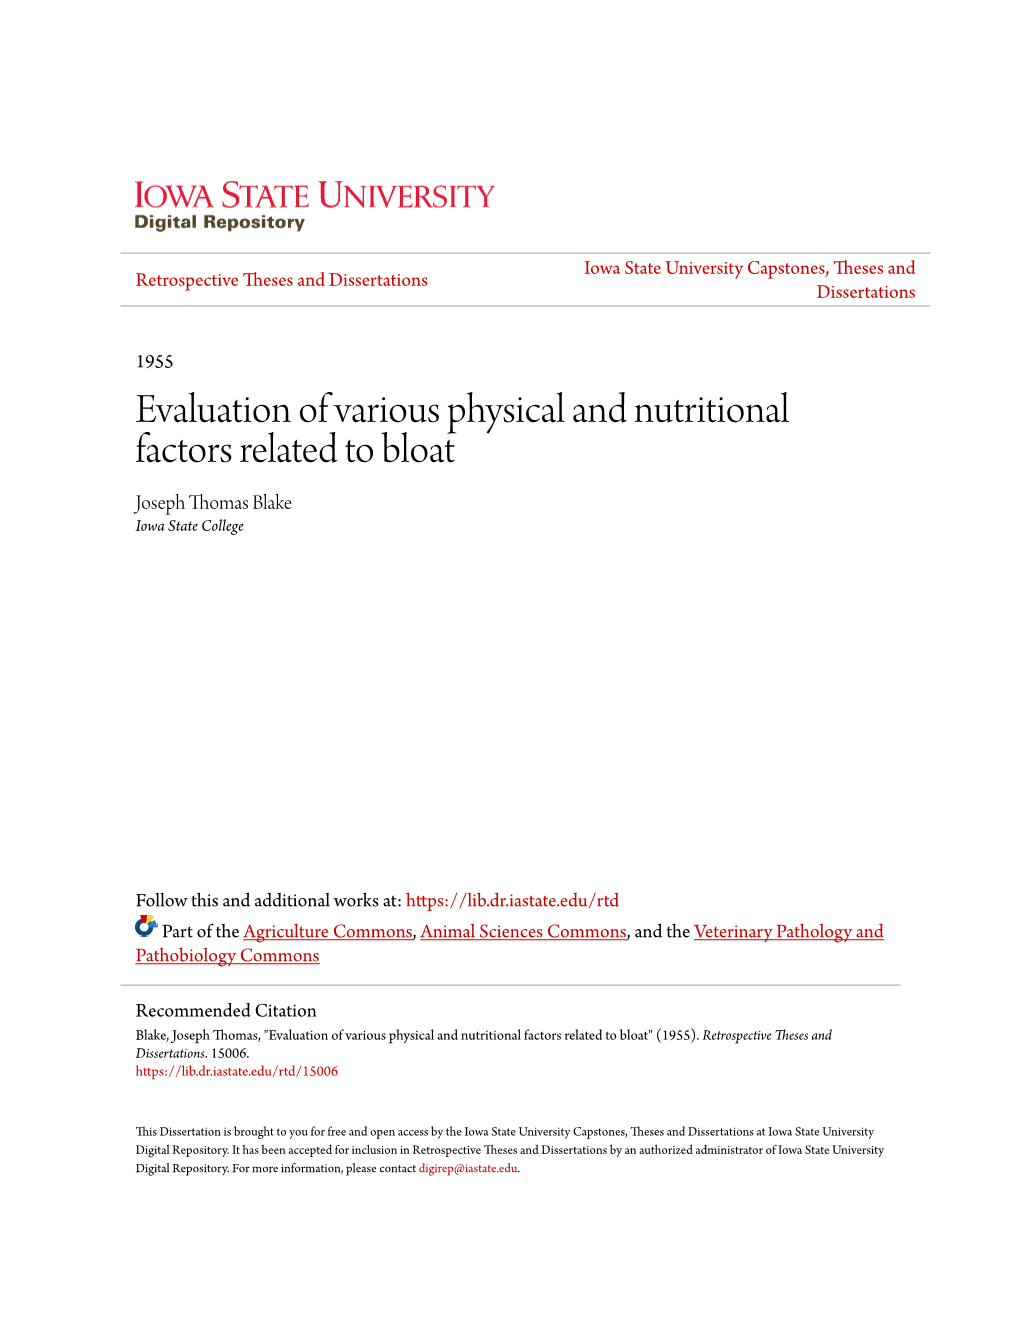 Evaluation of Various Physical and Nutritional Factors Related to Bloat Joseph Thomas Blake Iowa State College